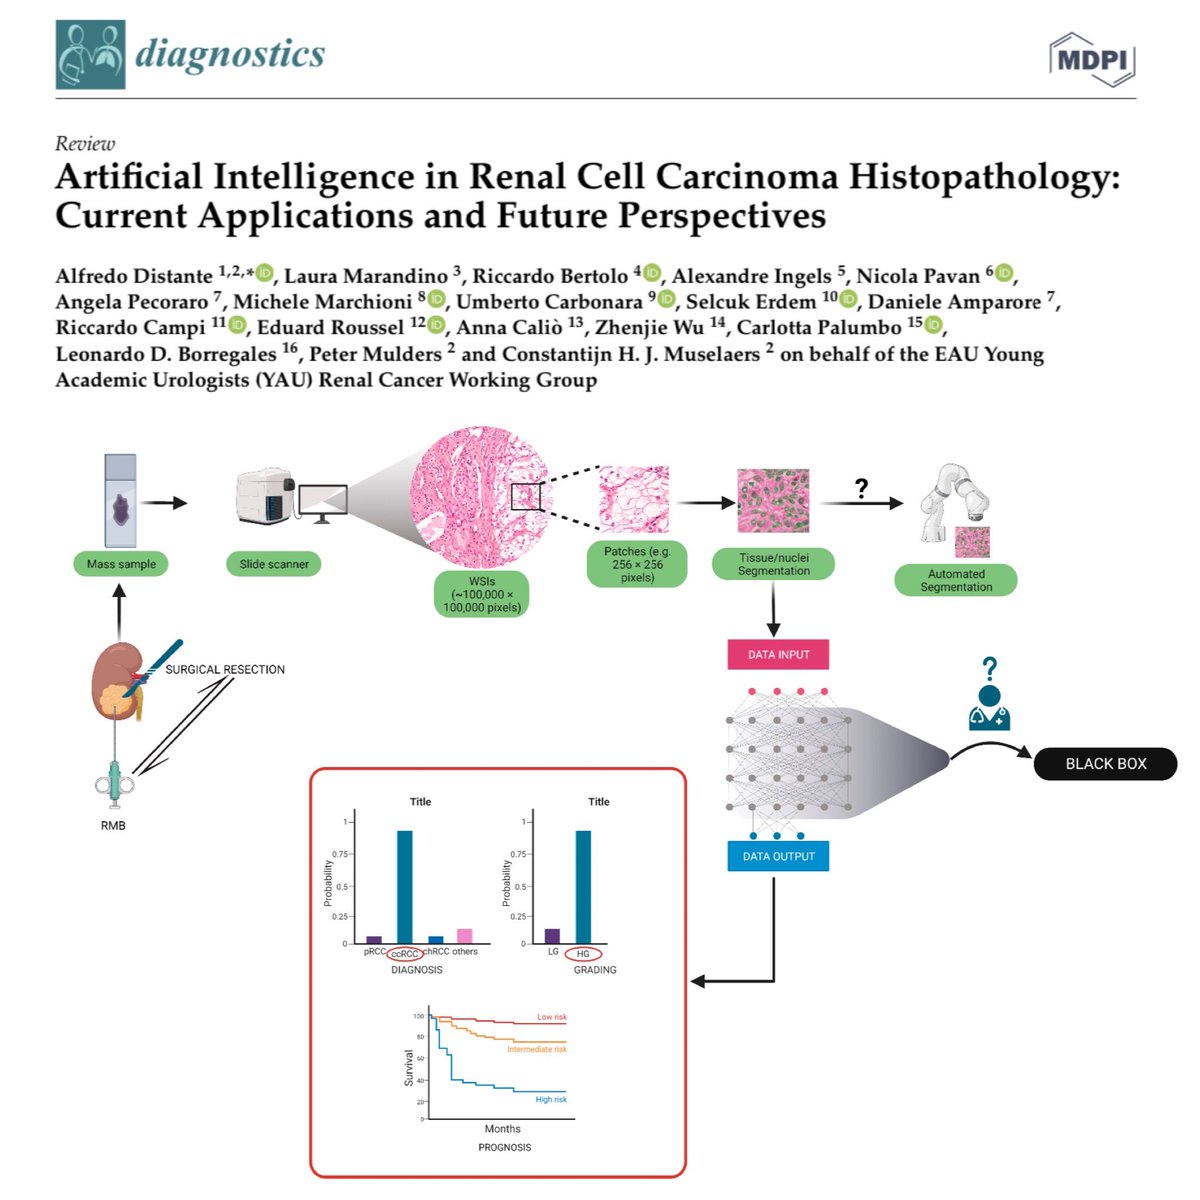 Congrats to Dr. Distante and @SMuselaers for leading @EAUYAU_RenalCa review exploring advancements in the field of #artificialintelligence 🤖🧠 in #kidneycancer #pathology. We aimed to assess whether they hold promise in improving #precision, #efficiency, and #objectivity of